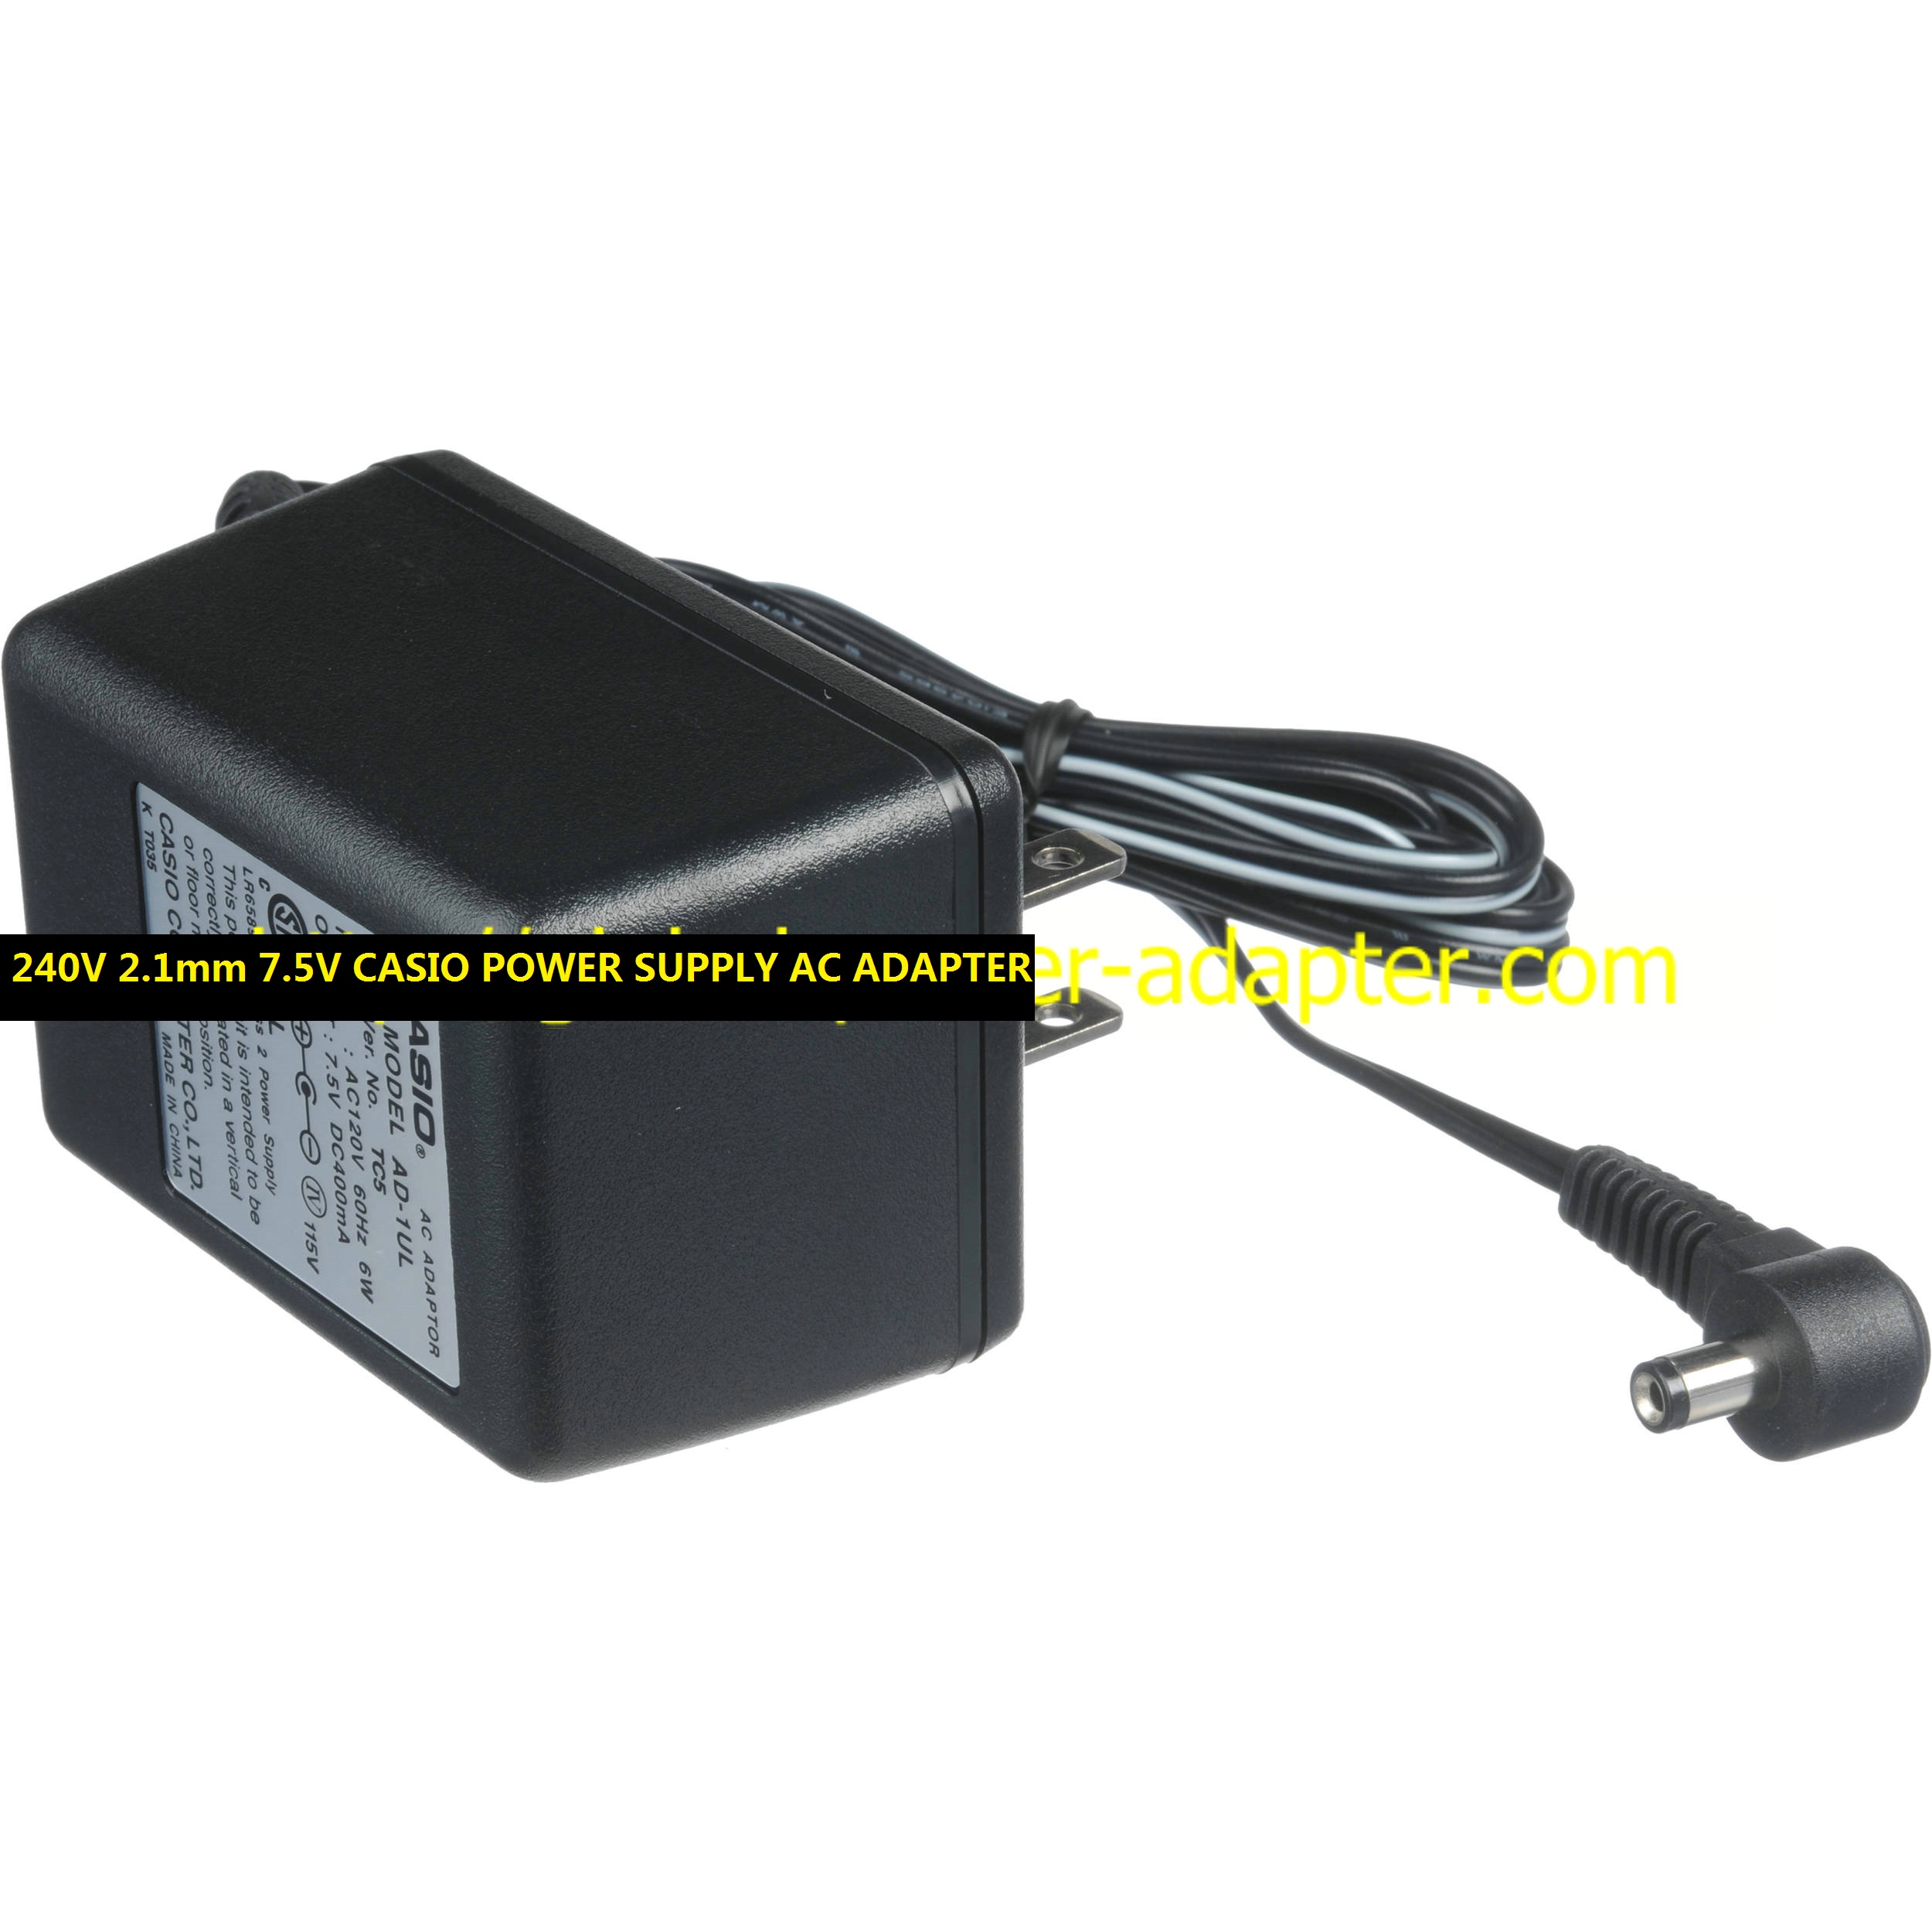 *100% Brand NEW* AC ADAPTER 240V 2.1mm 7.5V CASIO AD-1A POWER SUPPLY